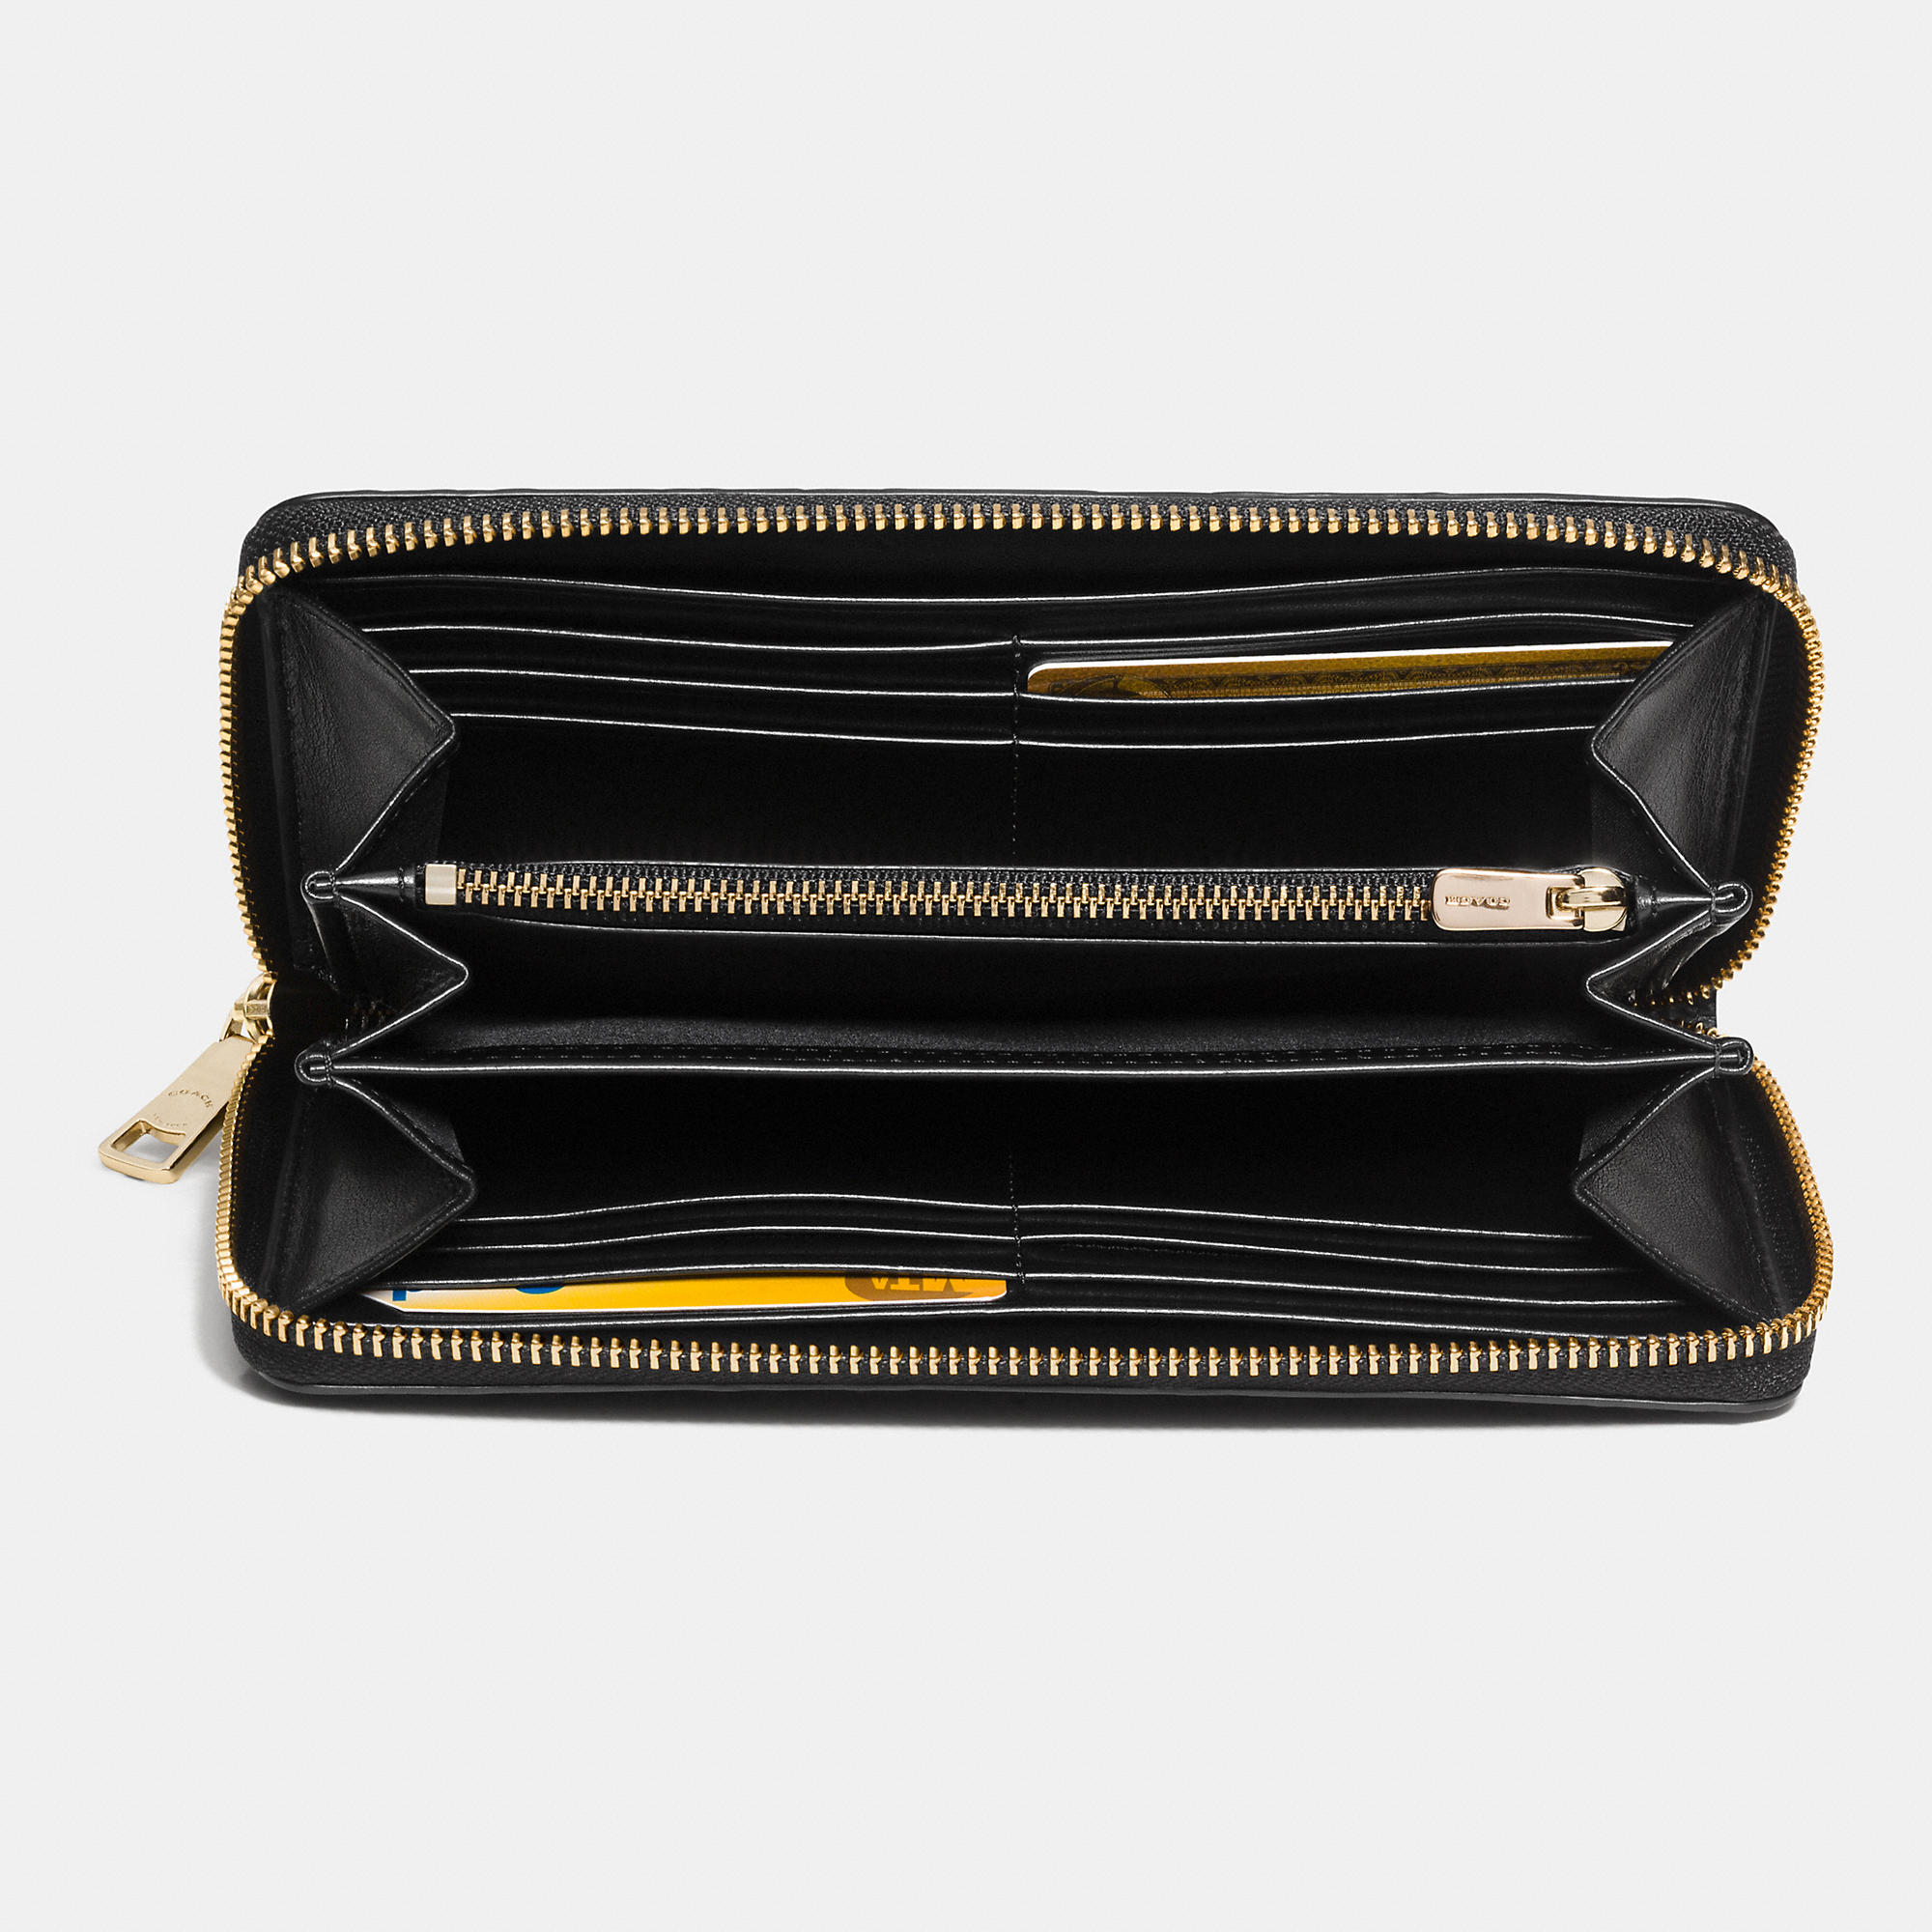 COACH Accordion Zip Wallet In Snake Embossed Leather in Light Gold/Black (Black) - Lyst